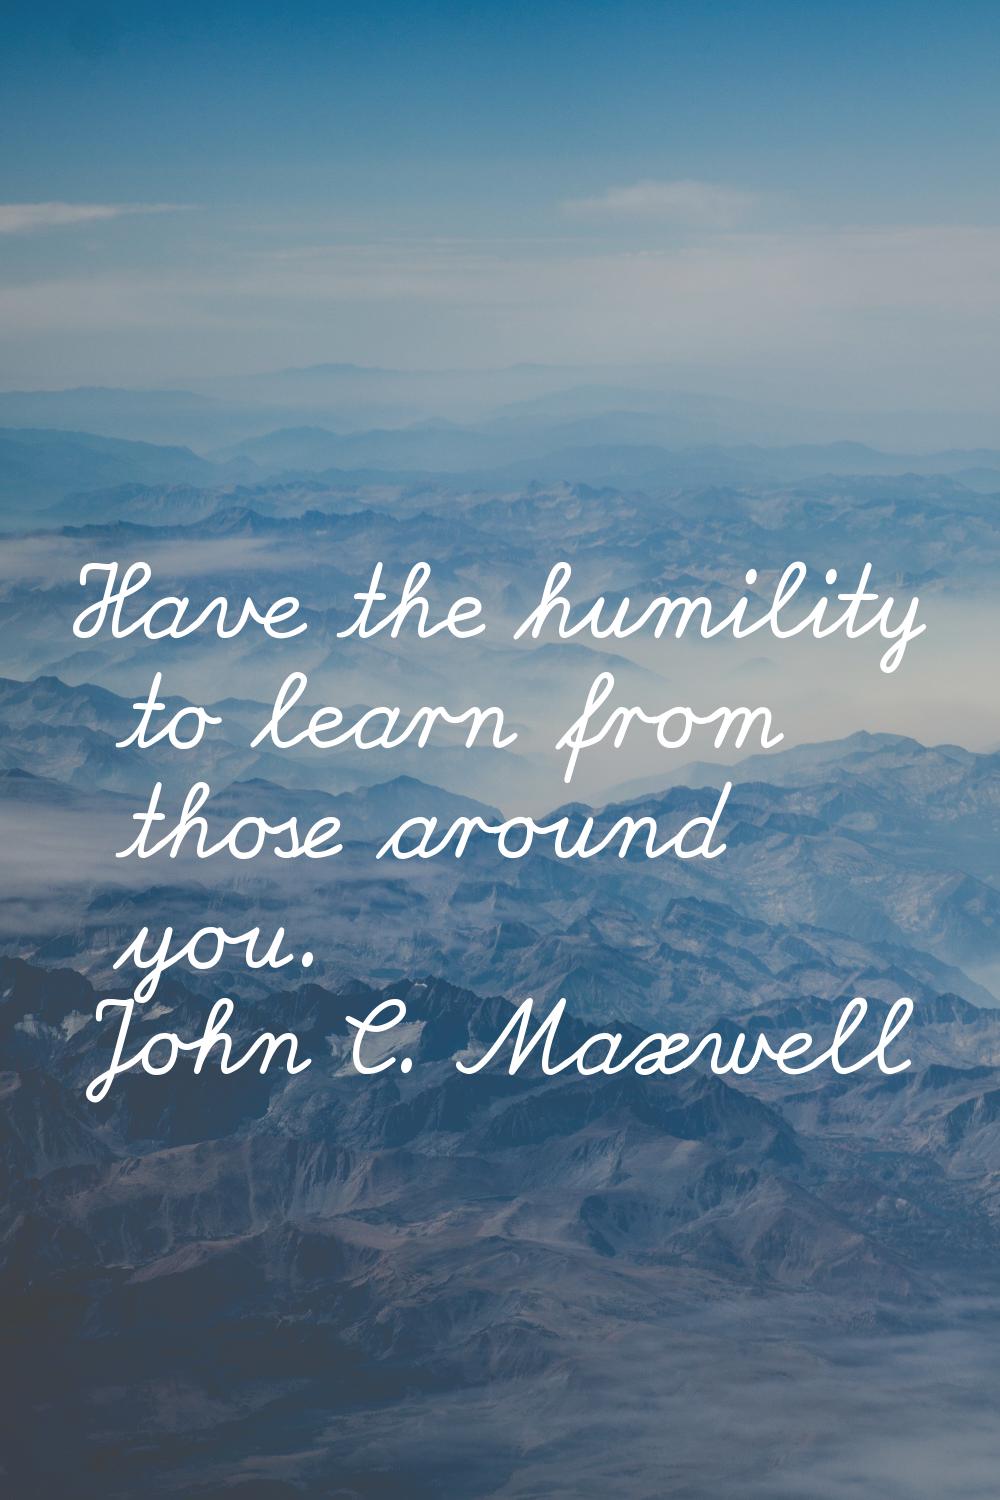 Have the humility to learn from those around you.